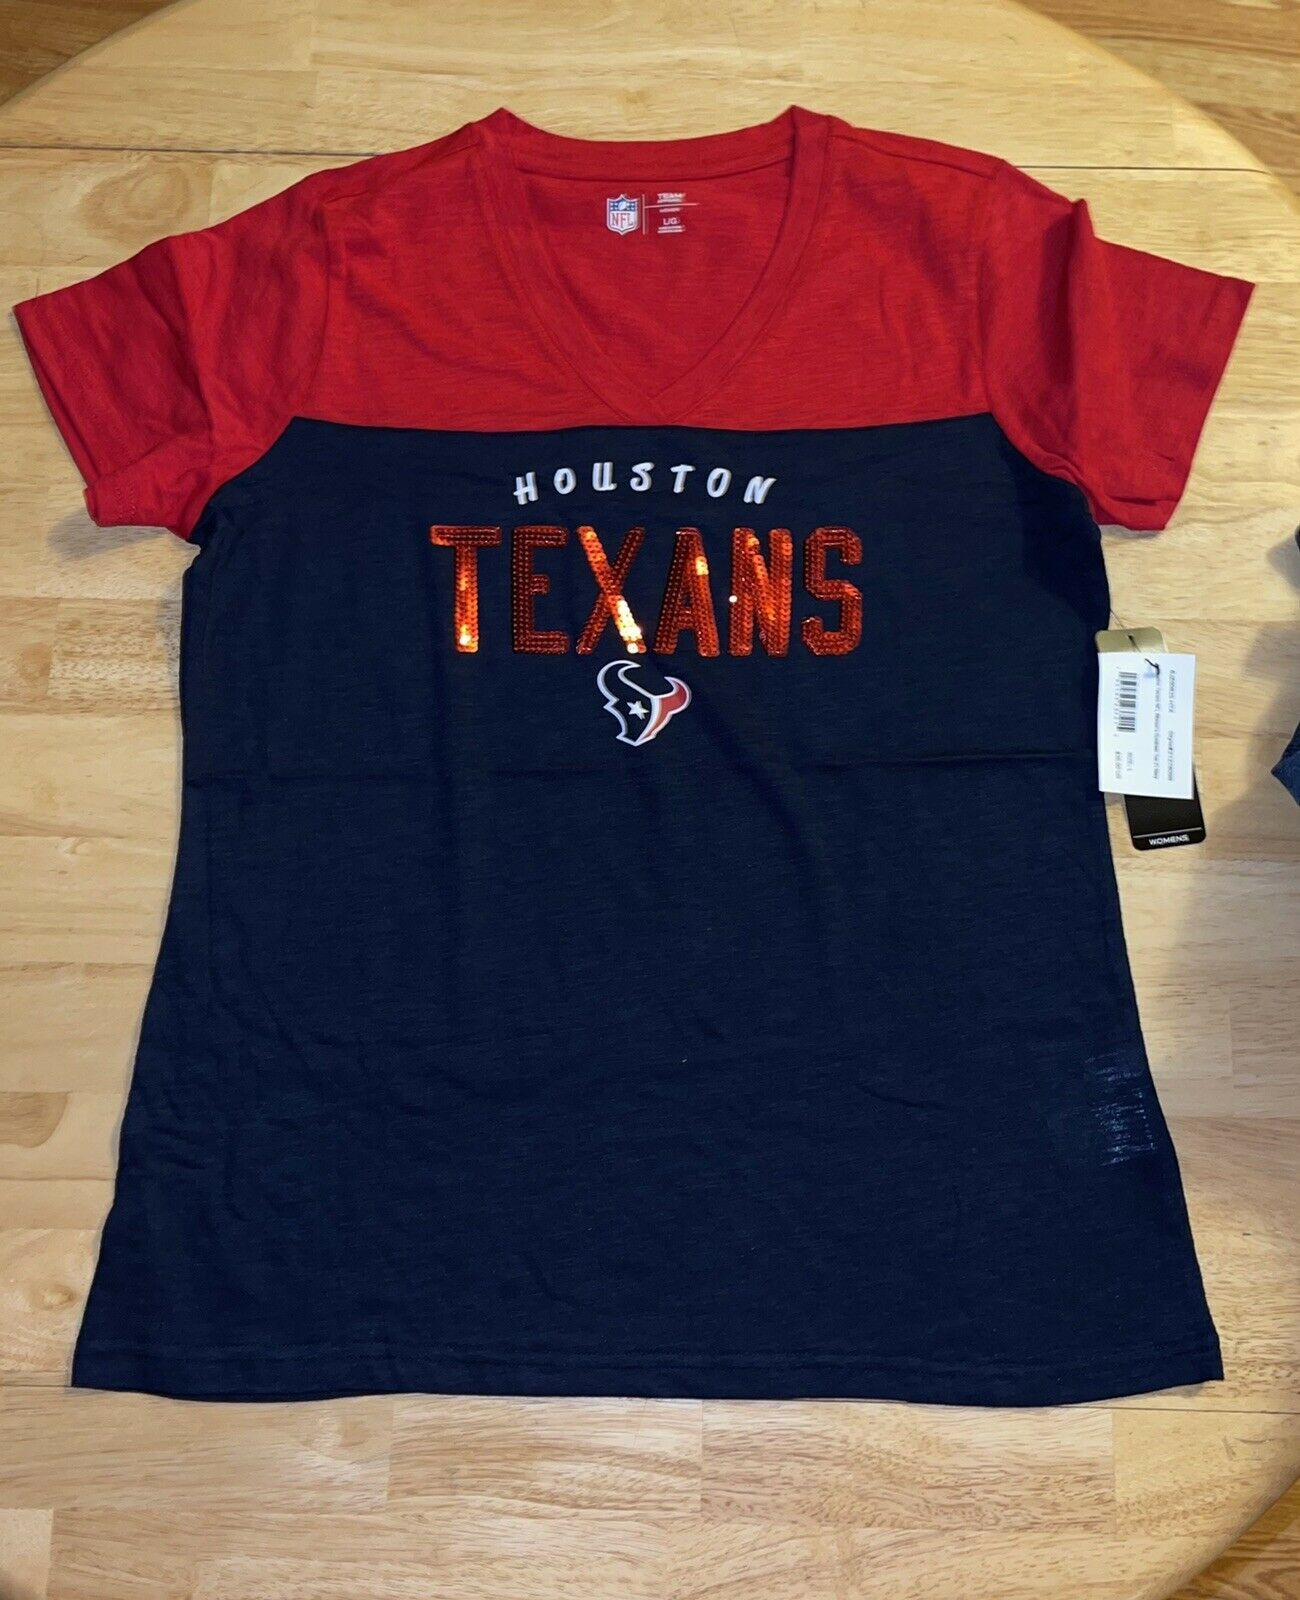 Primary image for Houston Texans NFL Women’s Rundown Tee 21 Navy BNWTS Size Large $35.00